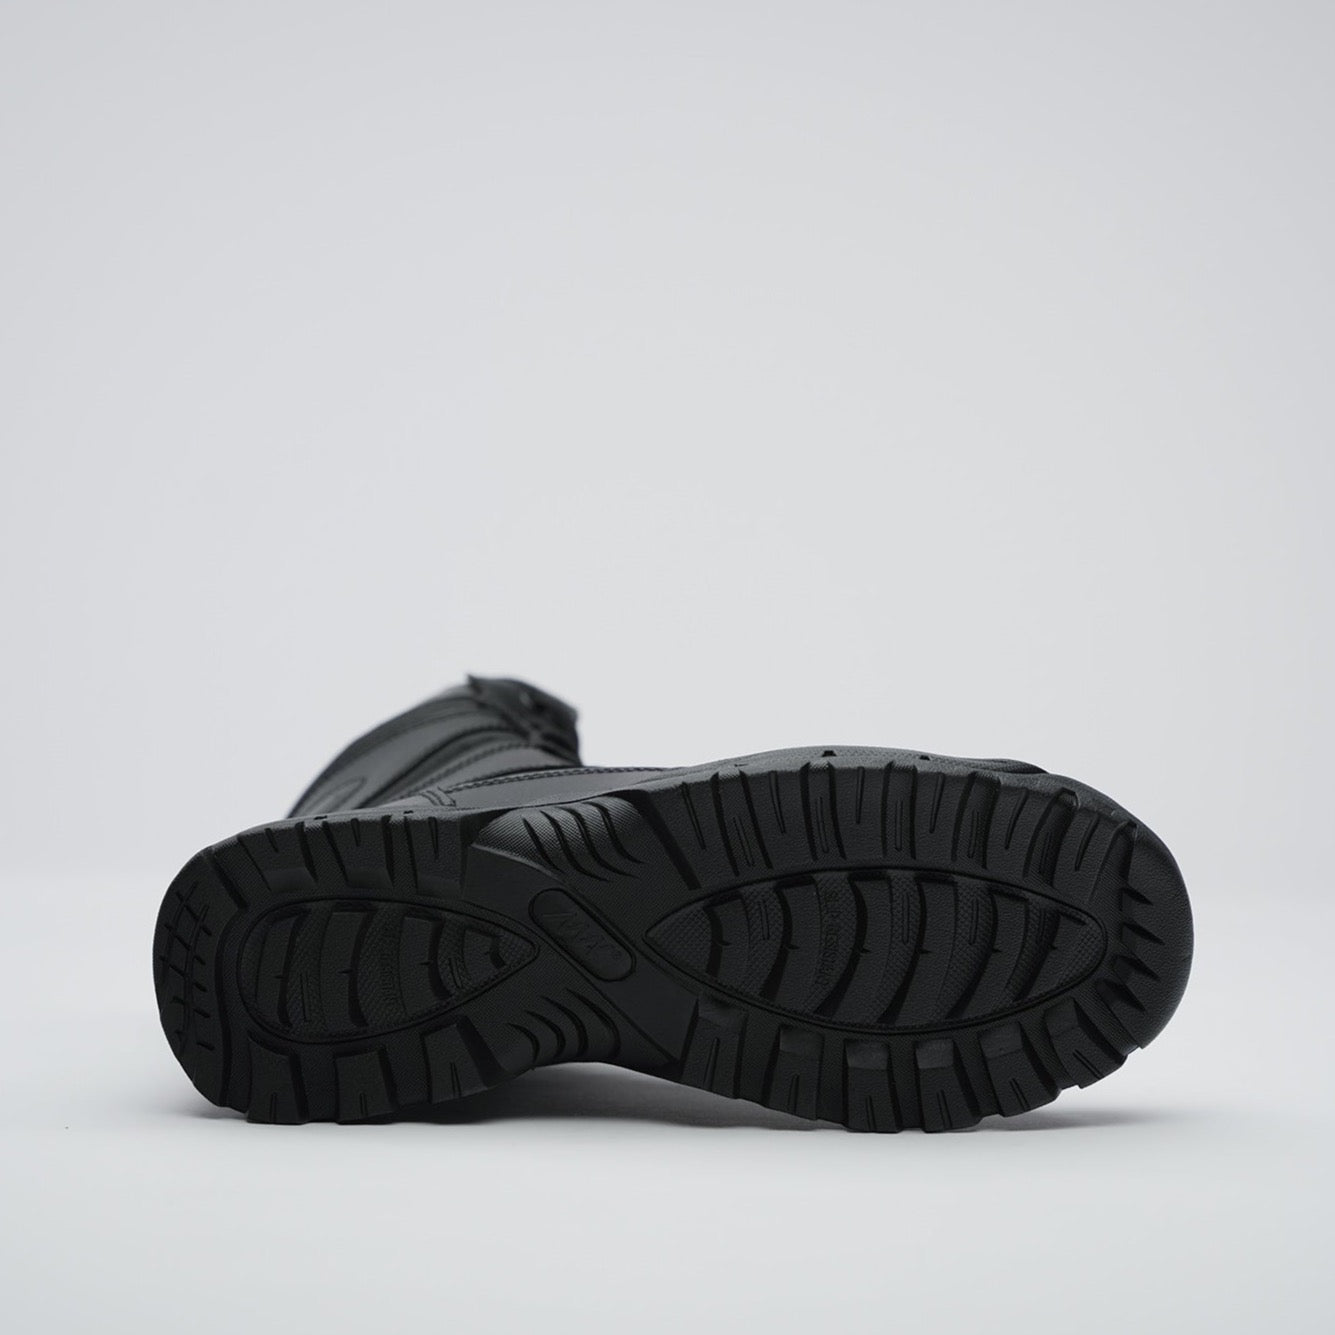 view of rubber sole with mak logo and slip resistance